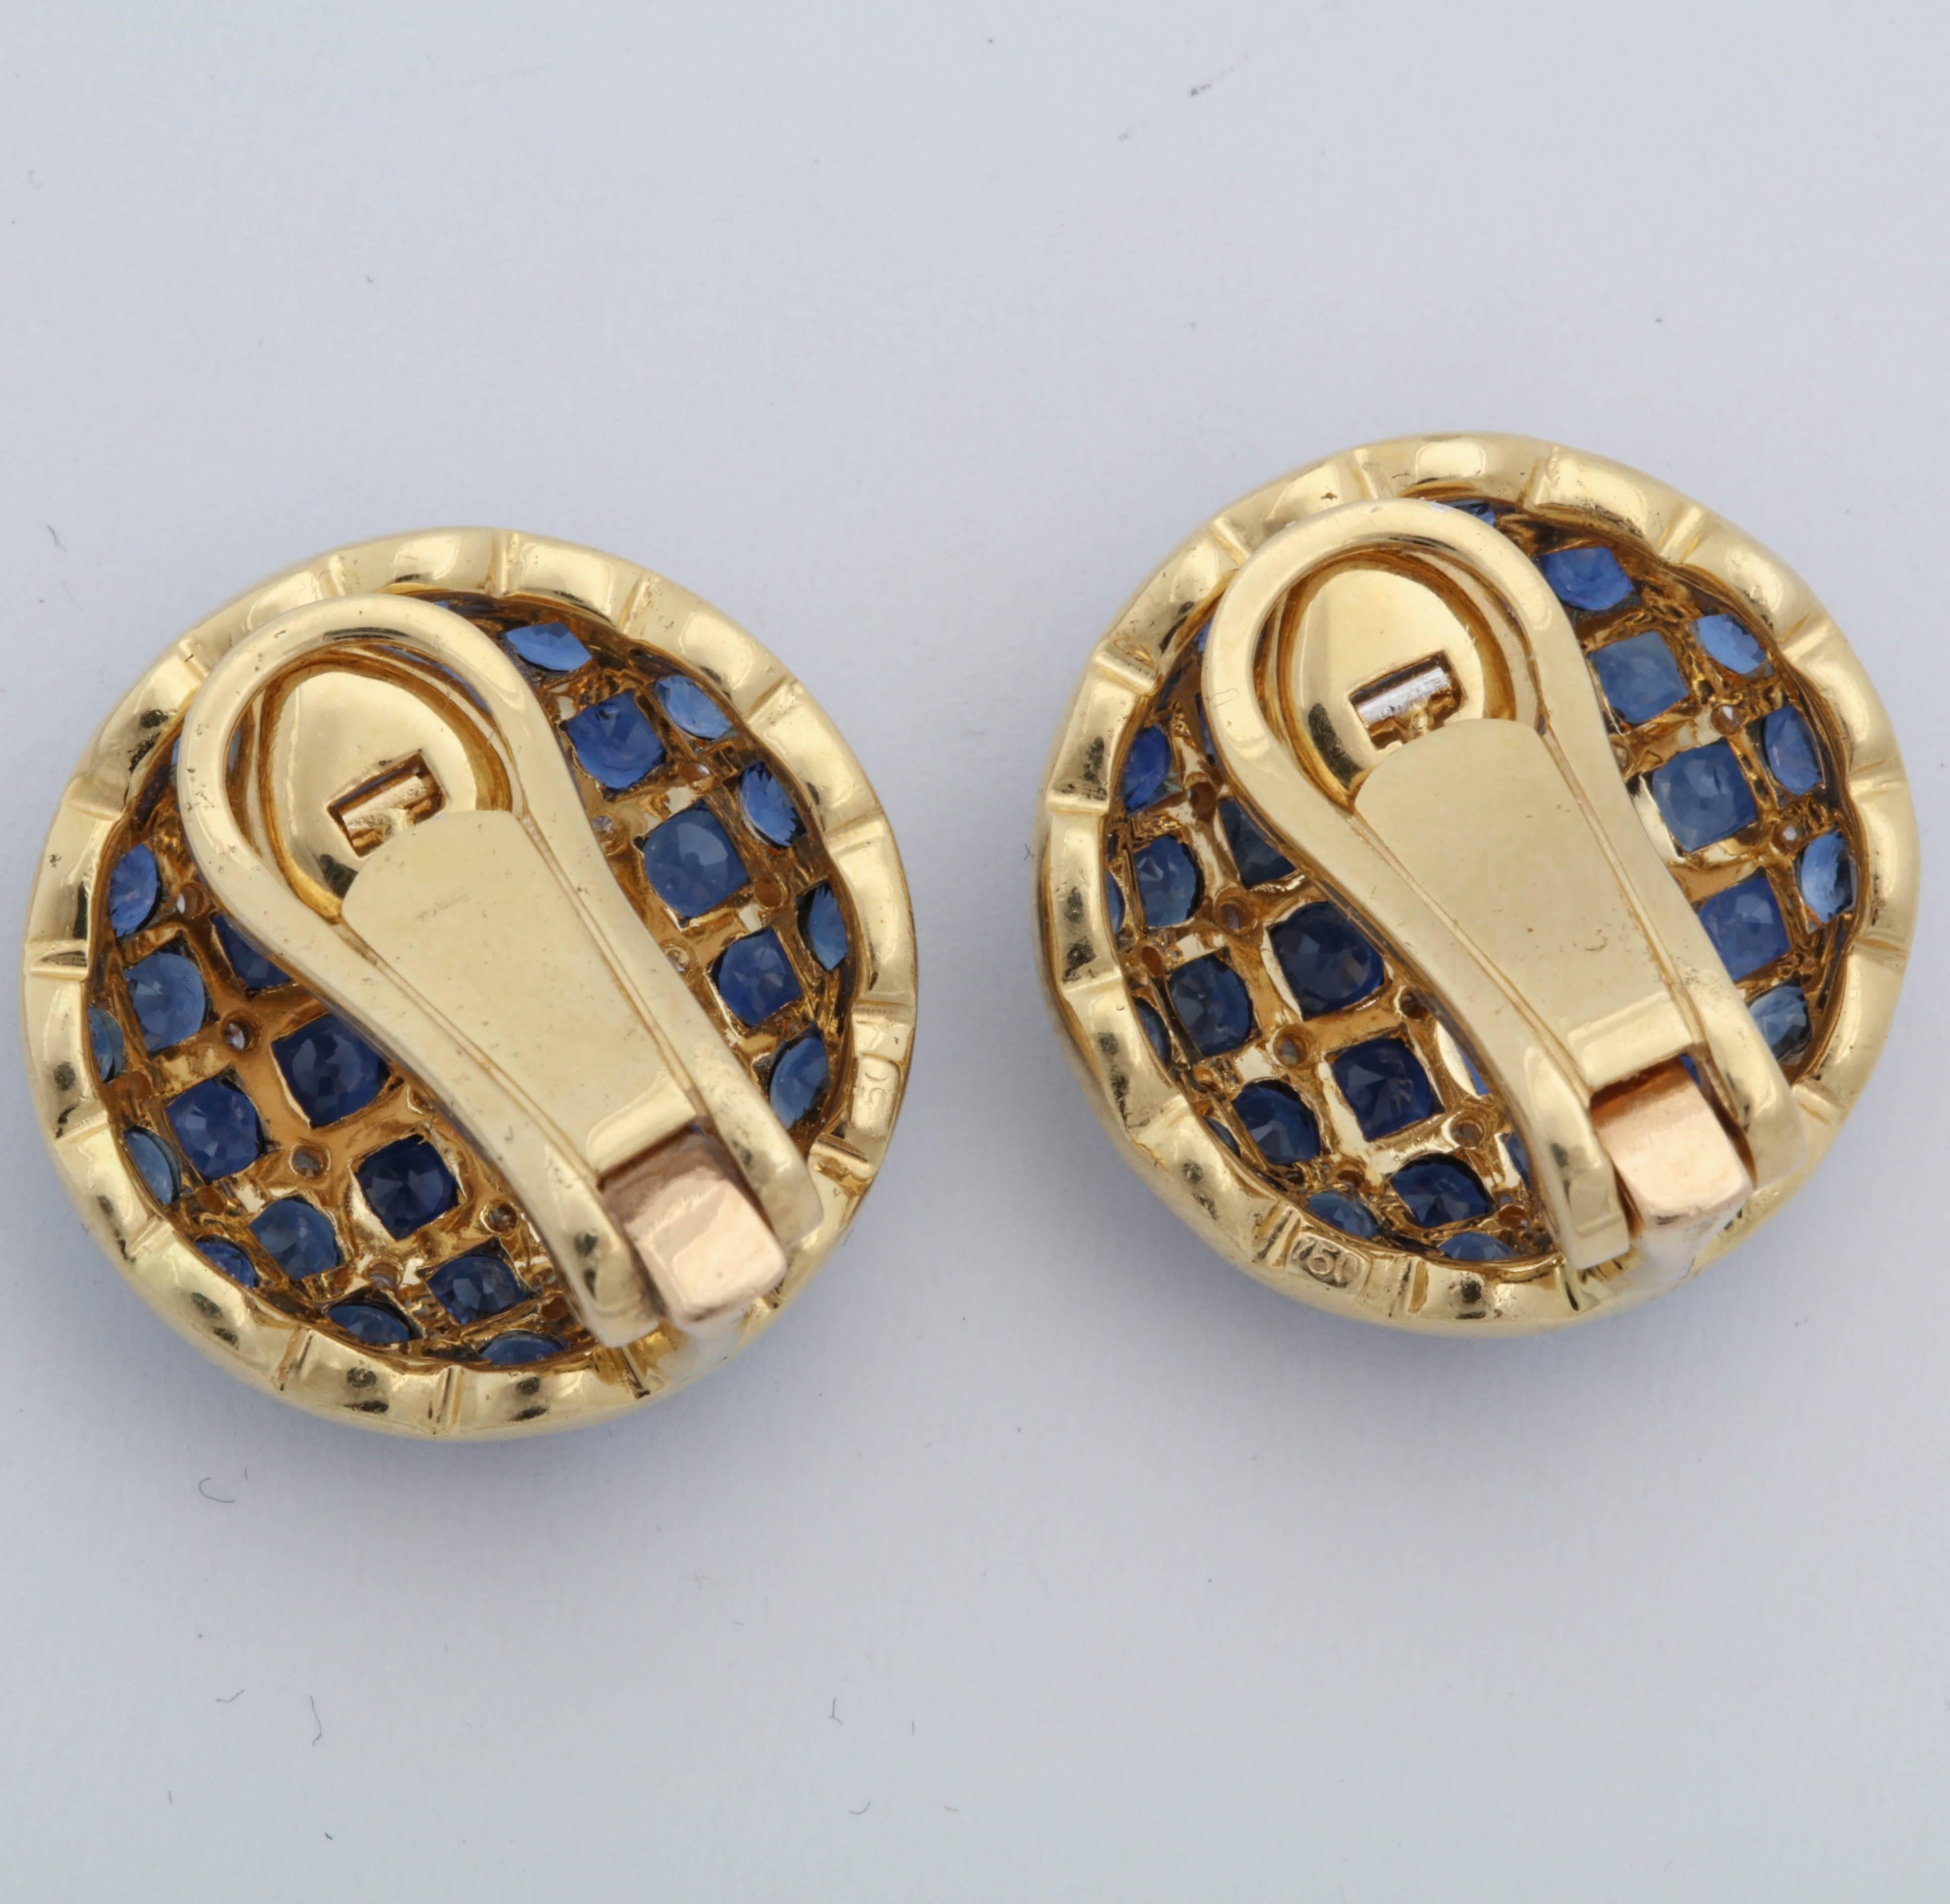 Round Cut 1950s Checkerboard Design Faceted Sapphires with Diamonds Gold Clip-On Earrings